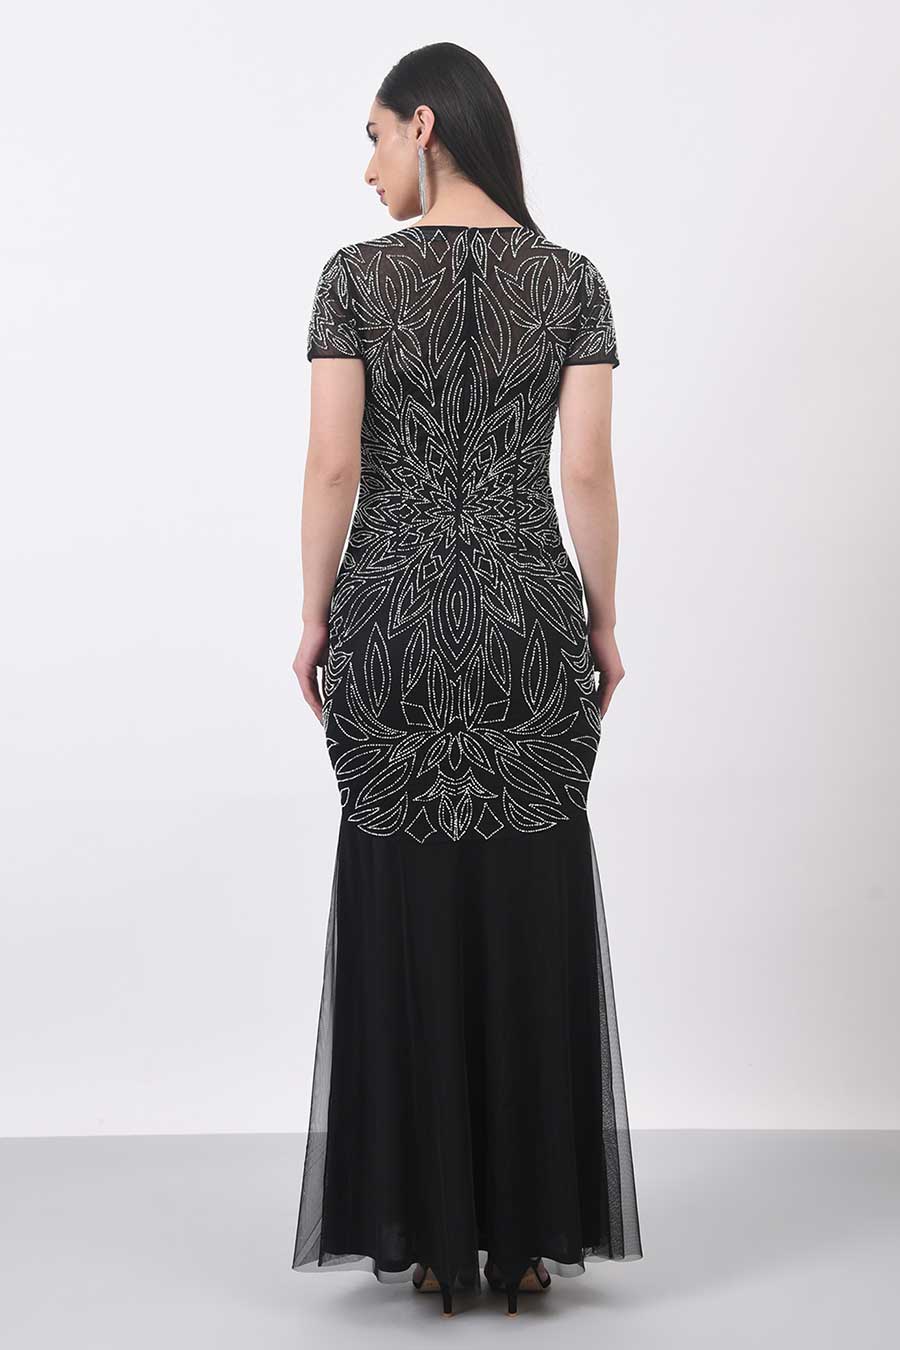 Black Embroidered Gown Dress